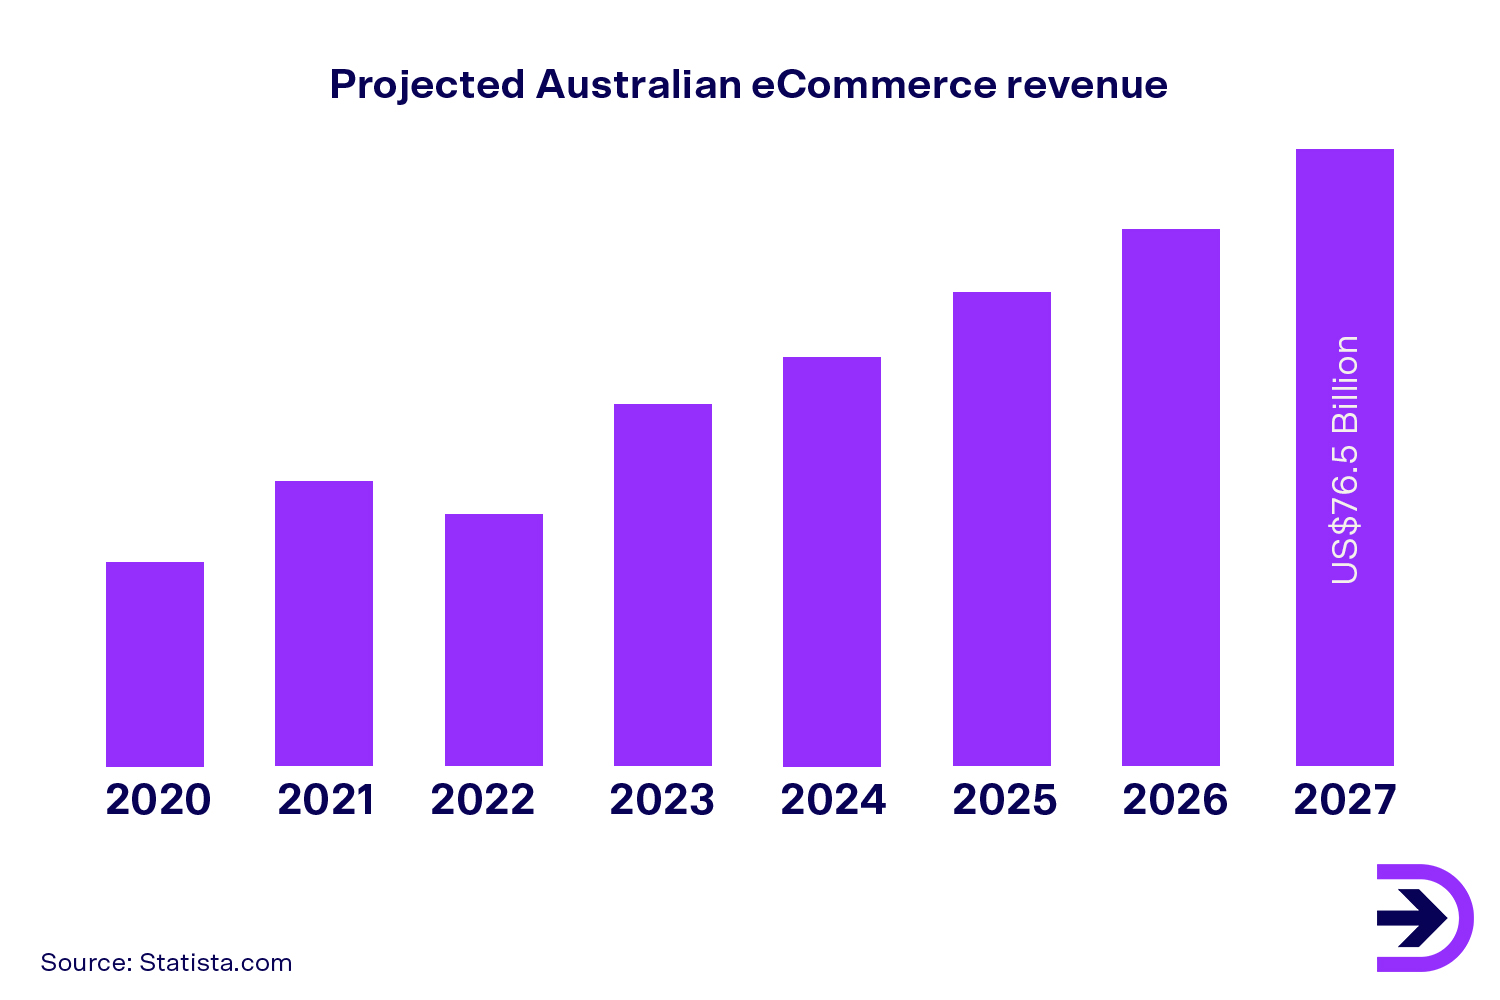 With the projected growth of ecommerce in Australia to reach $76.5 billion by 2027, there has never been a better time to start an online business.